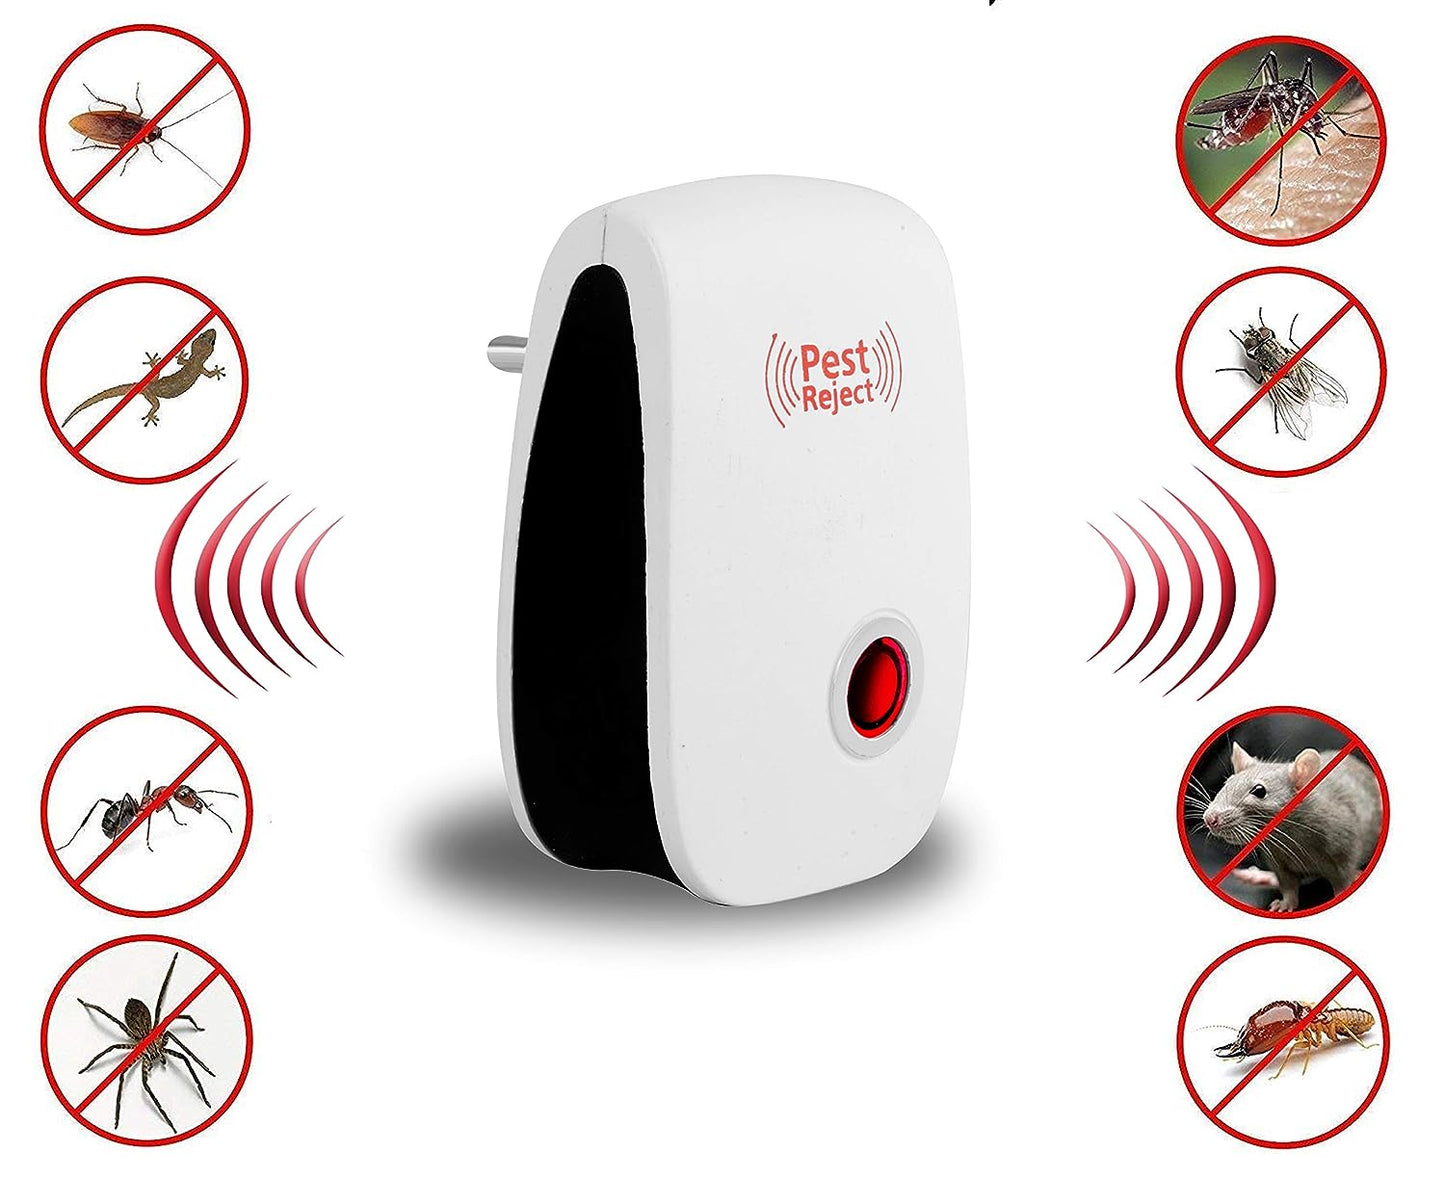 PEST REJECT Ultrasonic Pest Repeller to Repel Rats, Cockroach, Mosquito, Home Pest and Rodent Repelling Aid for Mosquito, Cockroaches, Ants Spider Insect Pest Control Electric Pest Repelling